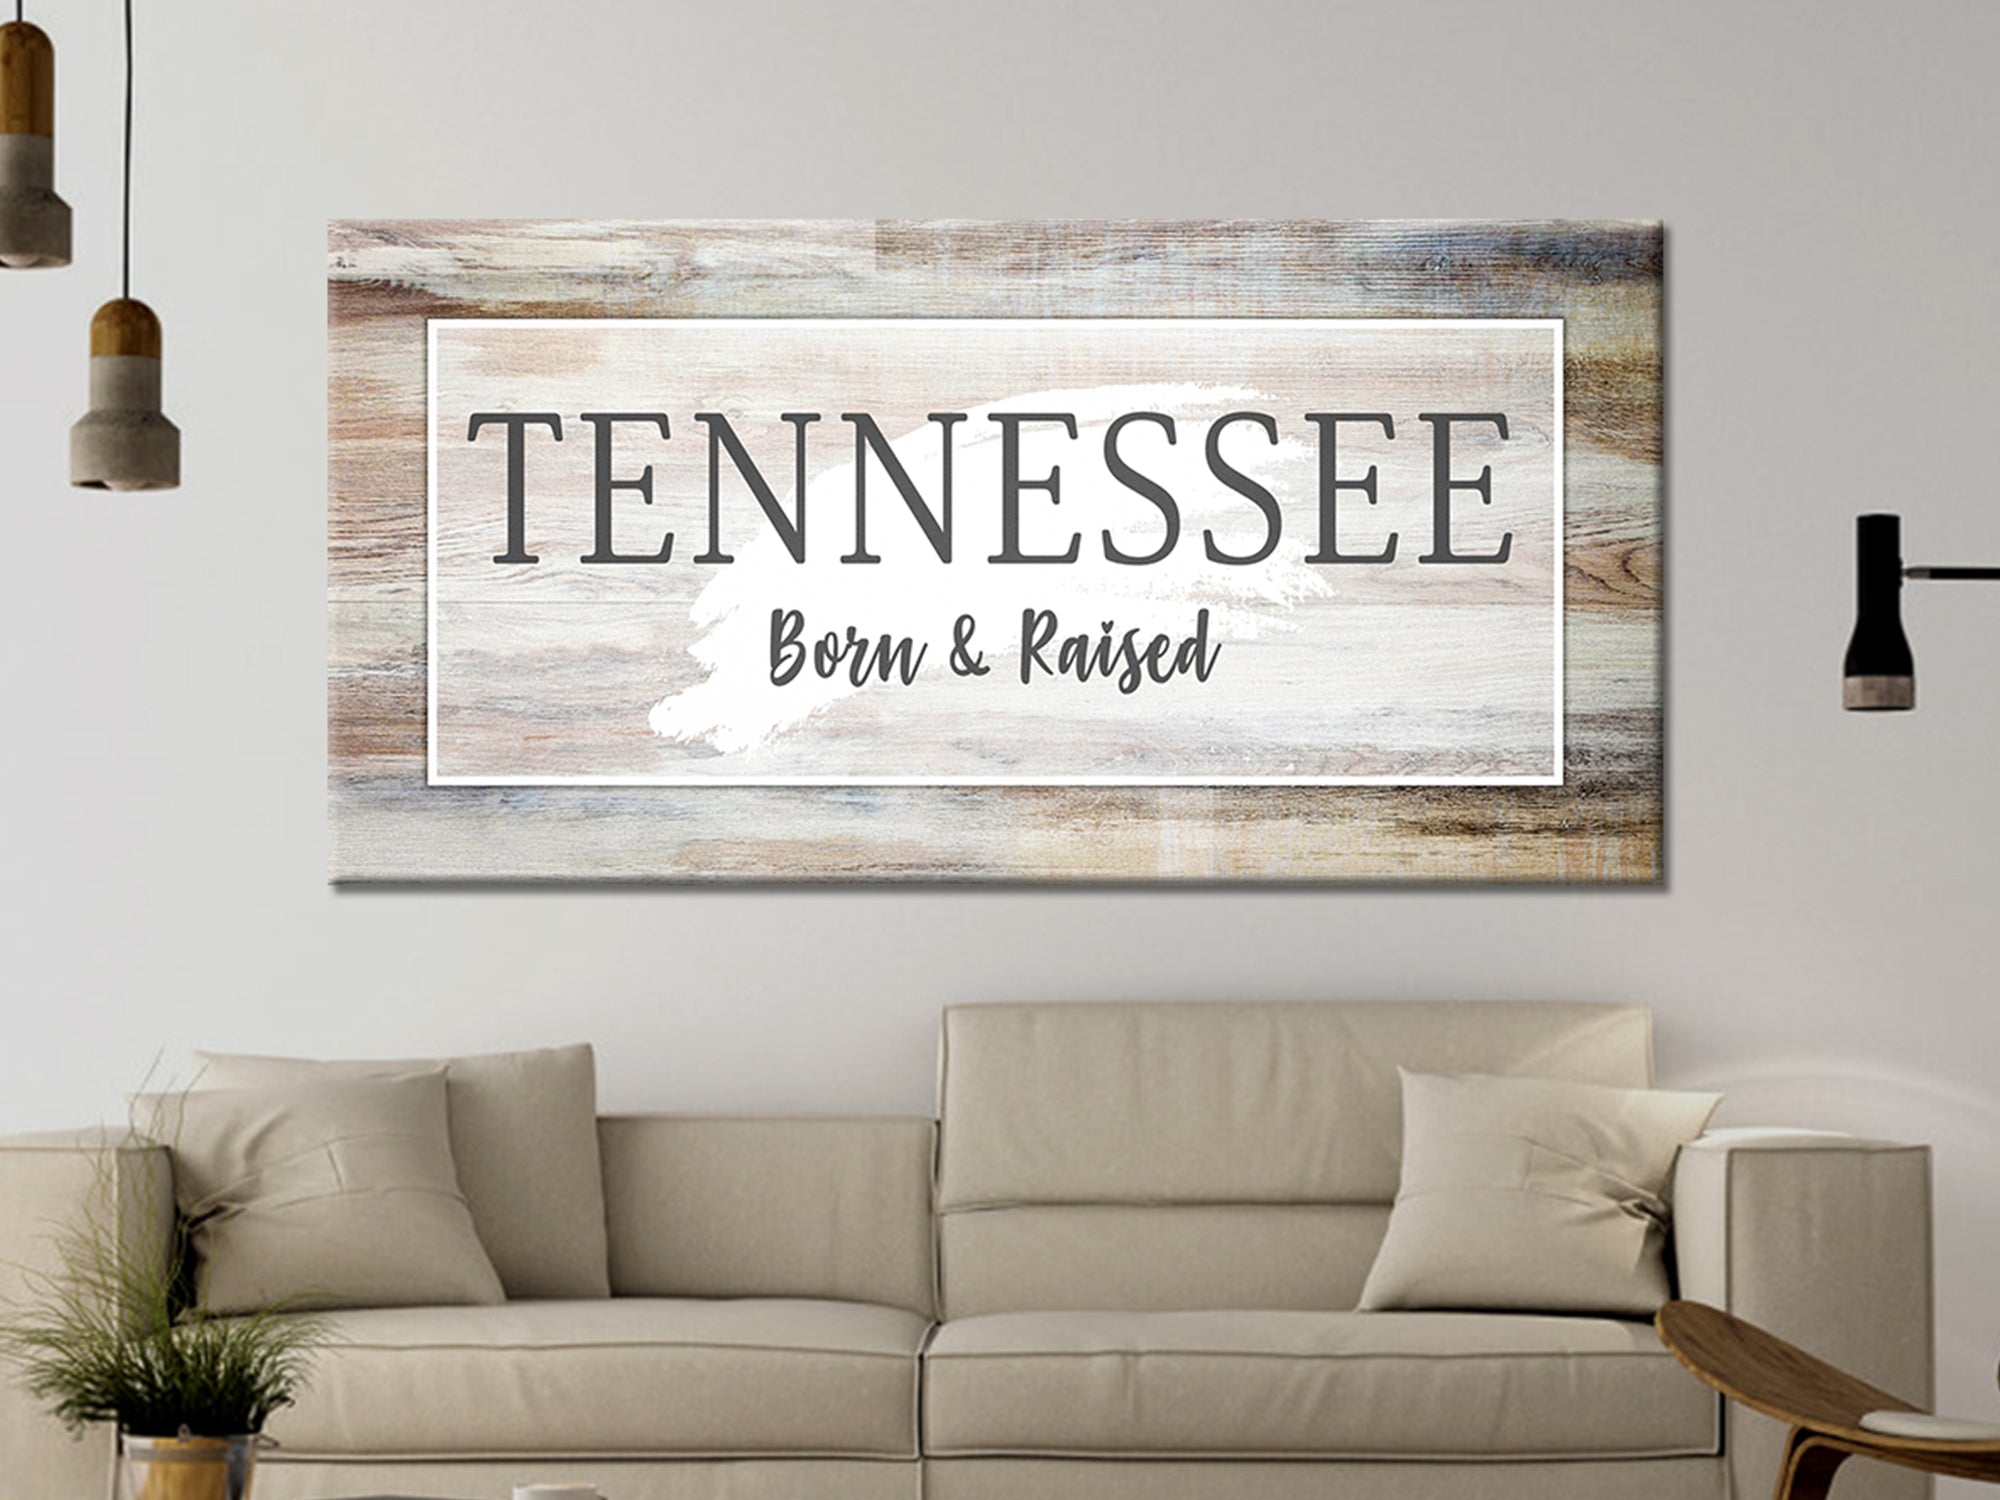 Tennessee Born and Raised - Christian - Canvas Wall Art